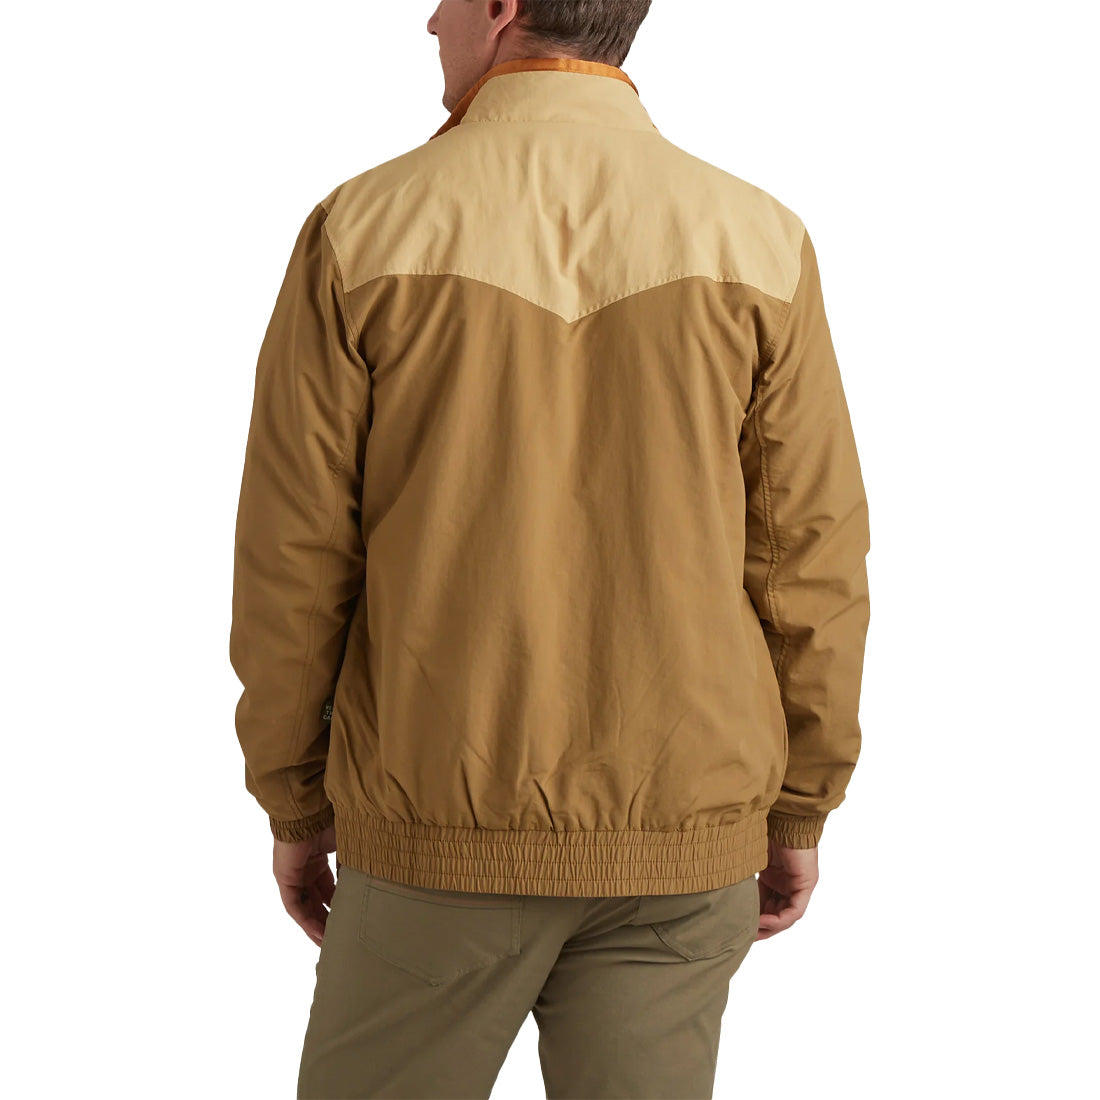 Howler Brothers Westers Club Jacket - Men's